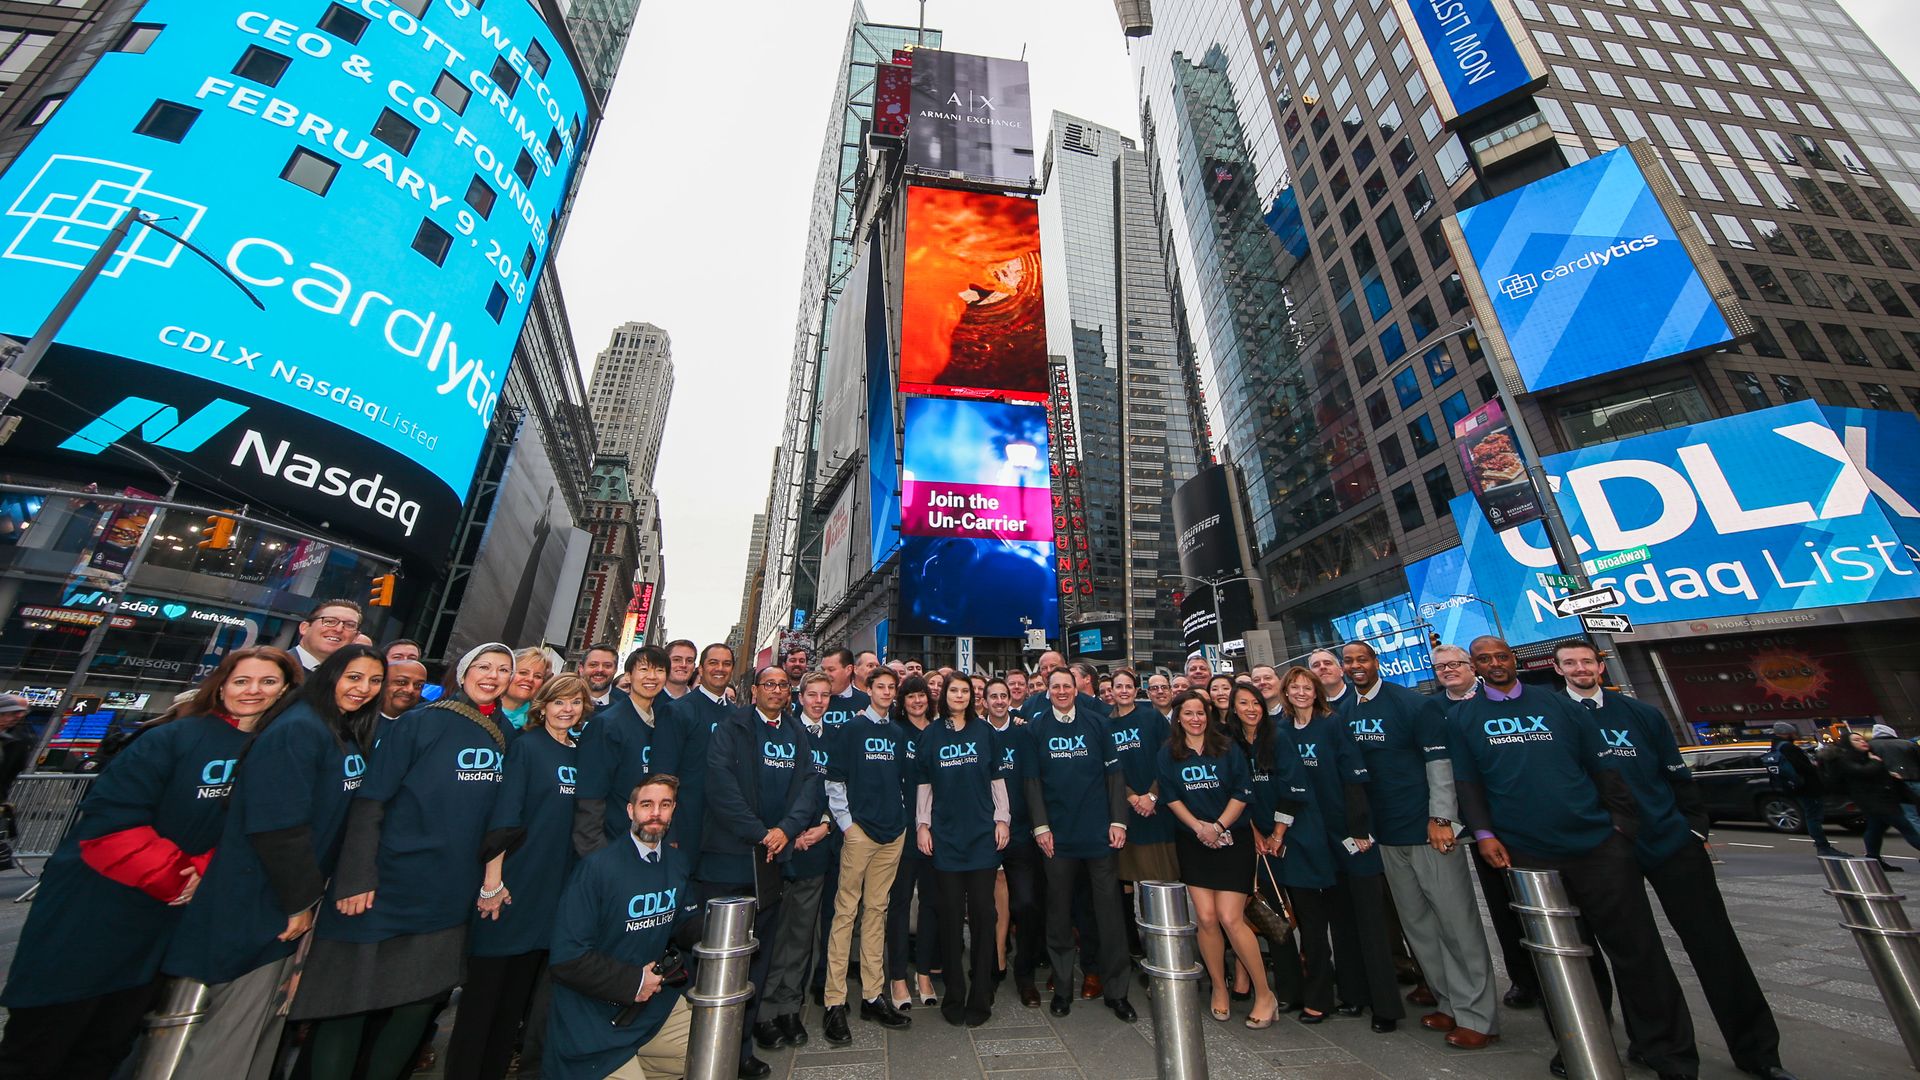 Cardlytics employees outside the NASDAQ Market Site in Times Square